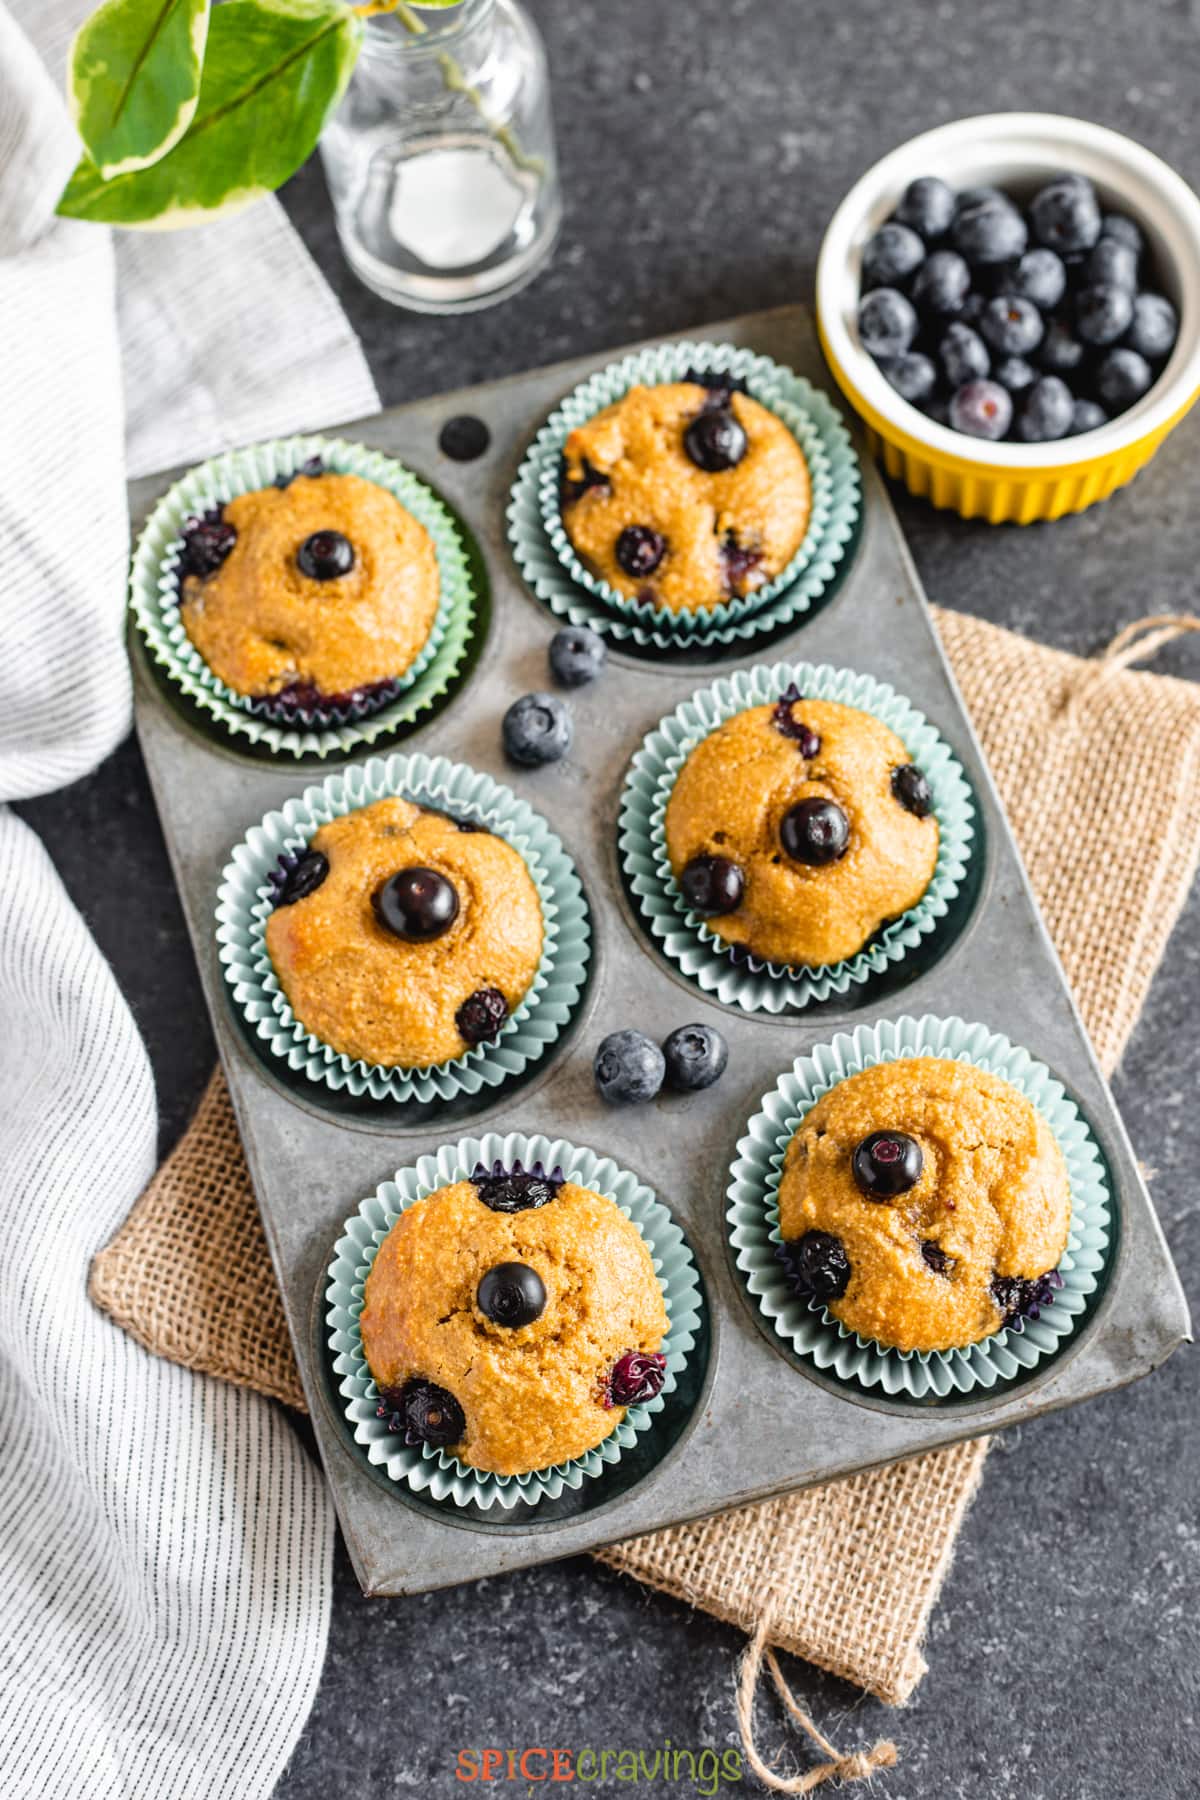 blueberry muffins in light blue liner in metal baking pan